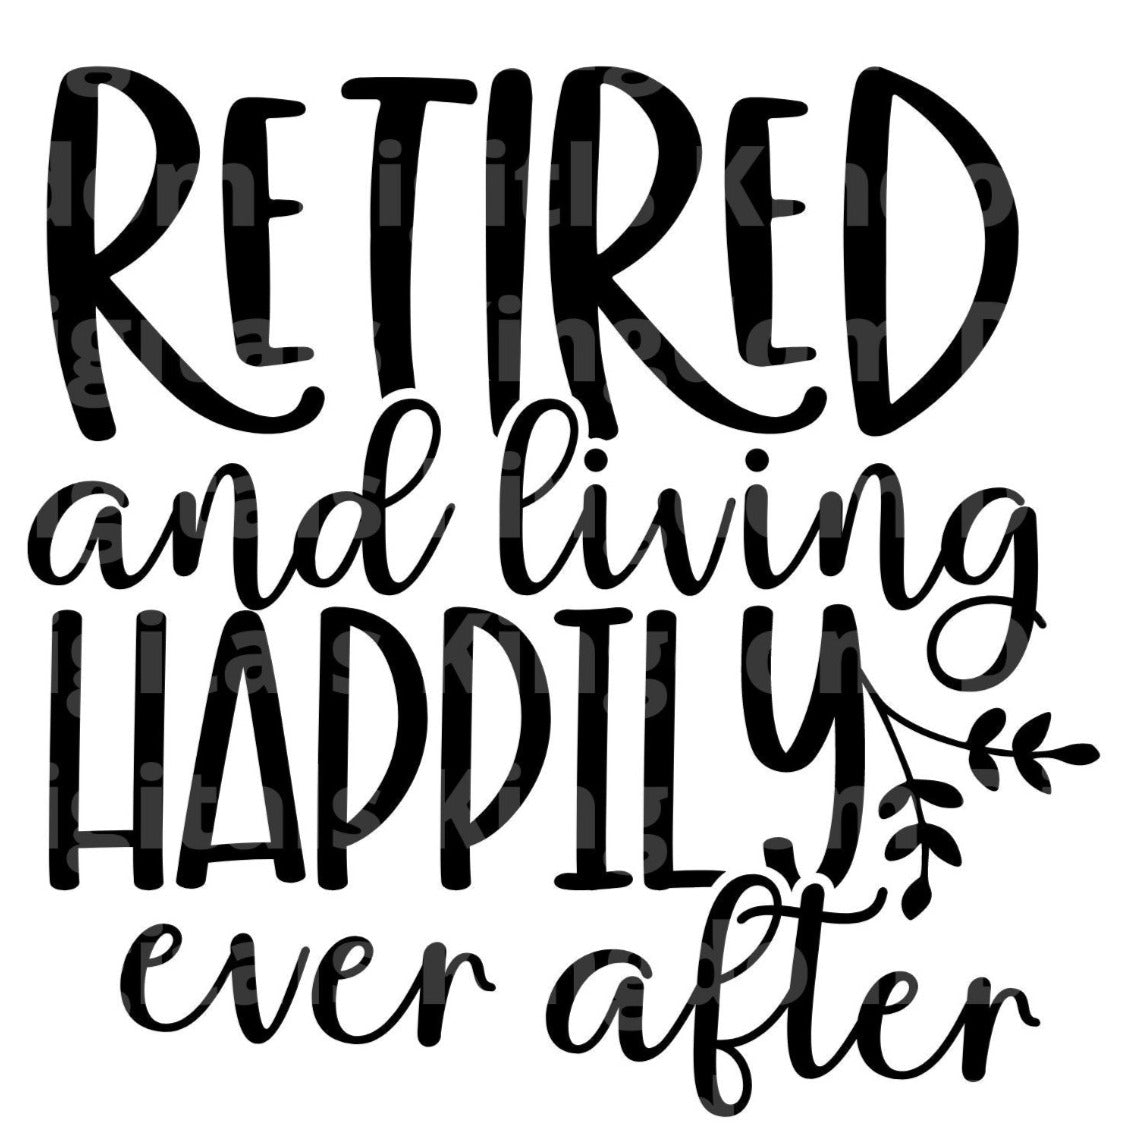 Retired & Living Happily Ever After SVG Cut File